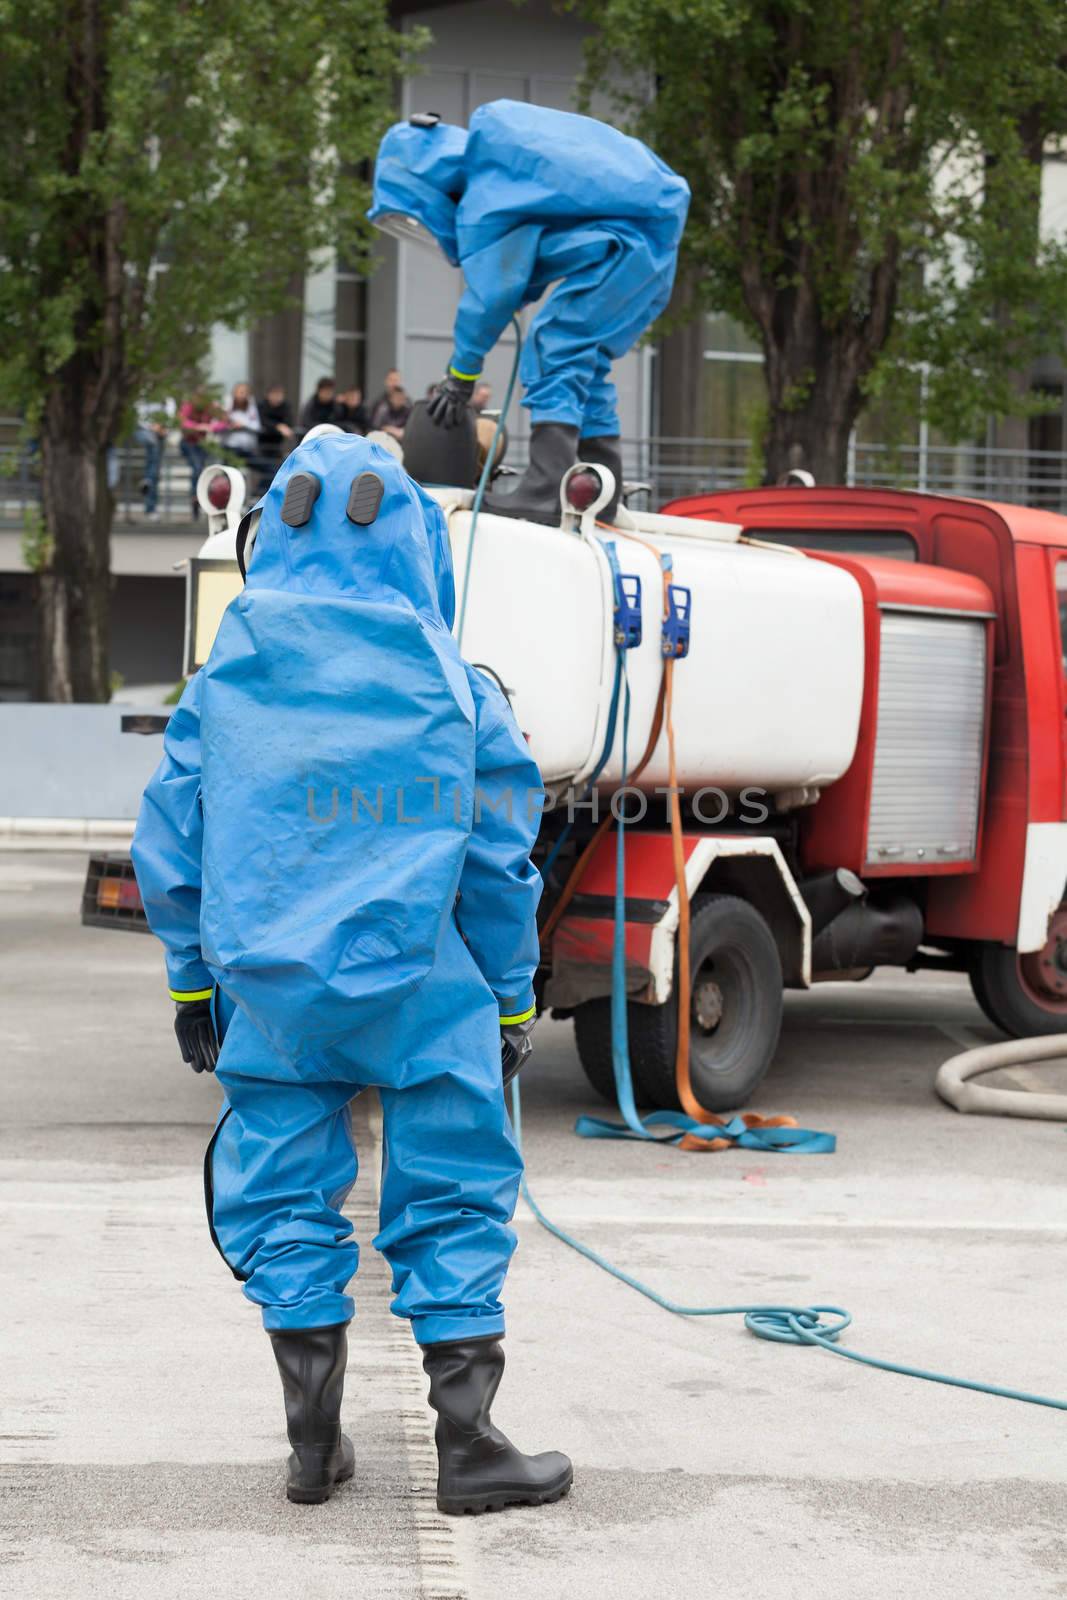 Simulation of a chemical spill after road accident